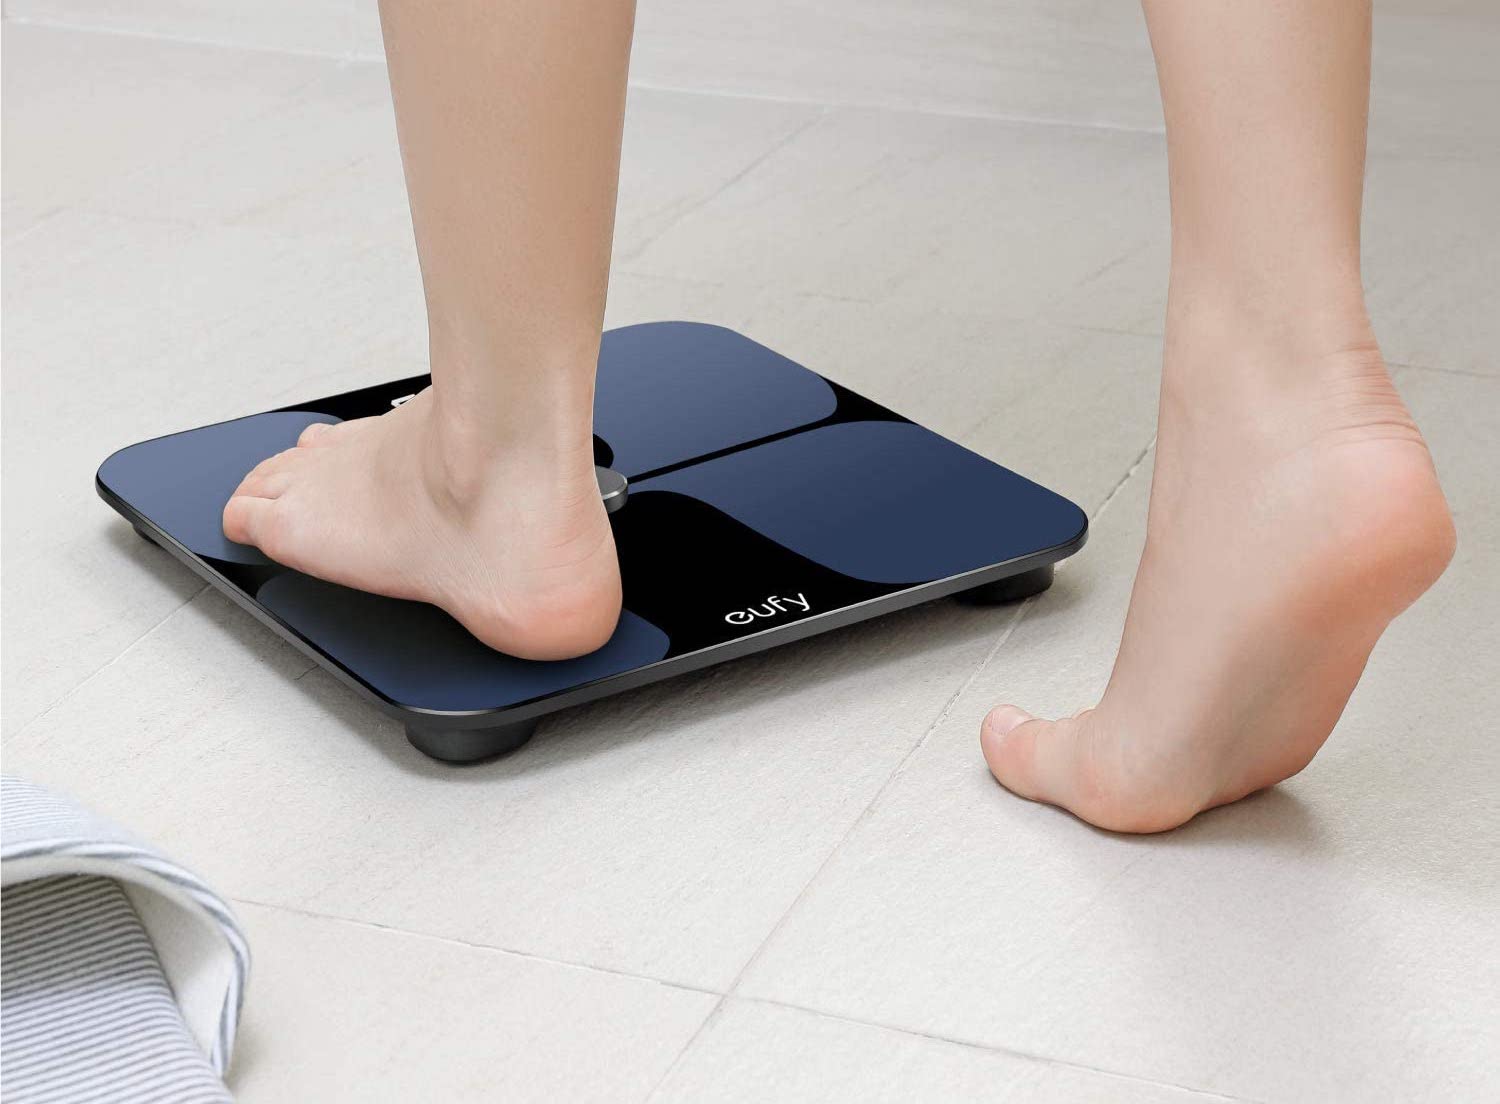 Track your weight, BMI, and more for just $27 with the eufy Smart Scale